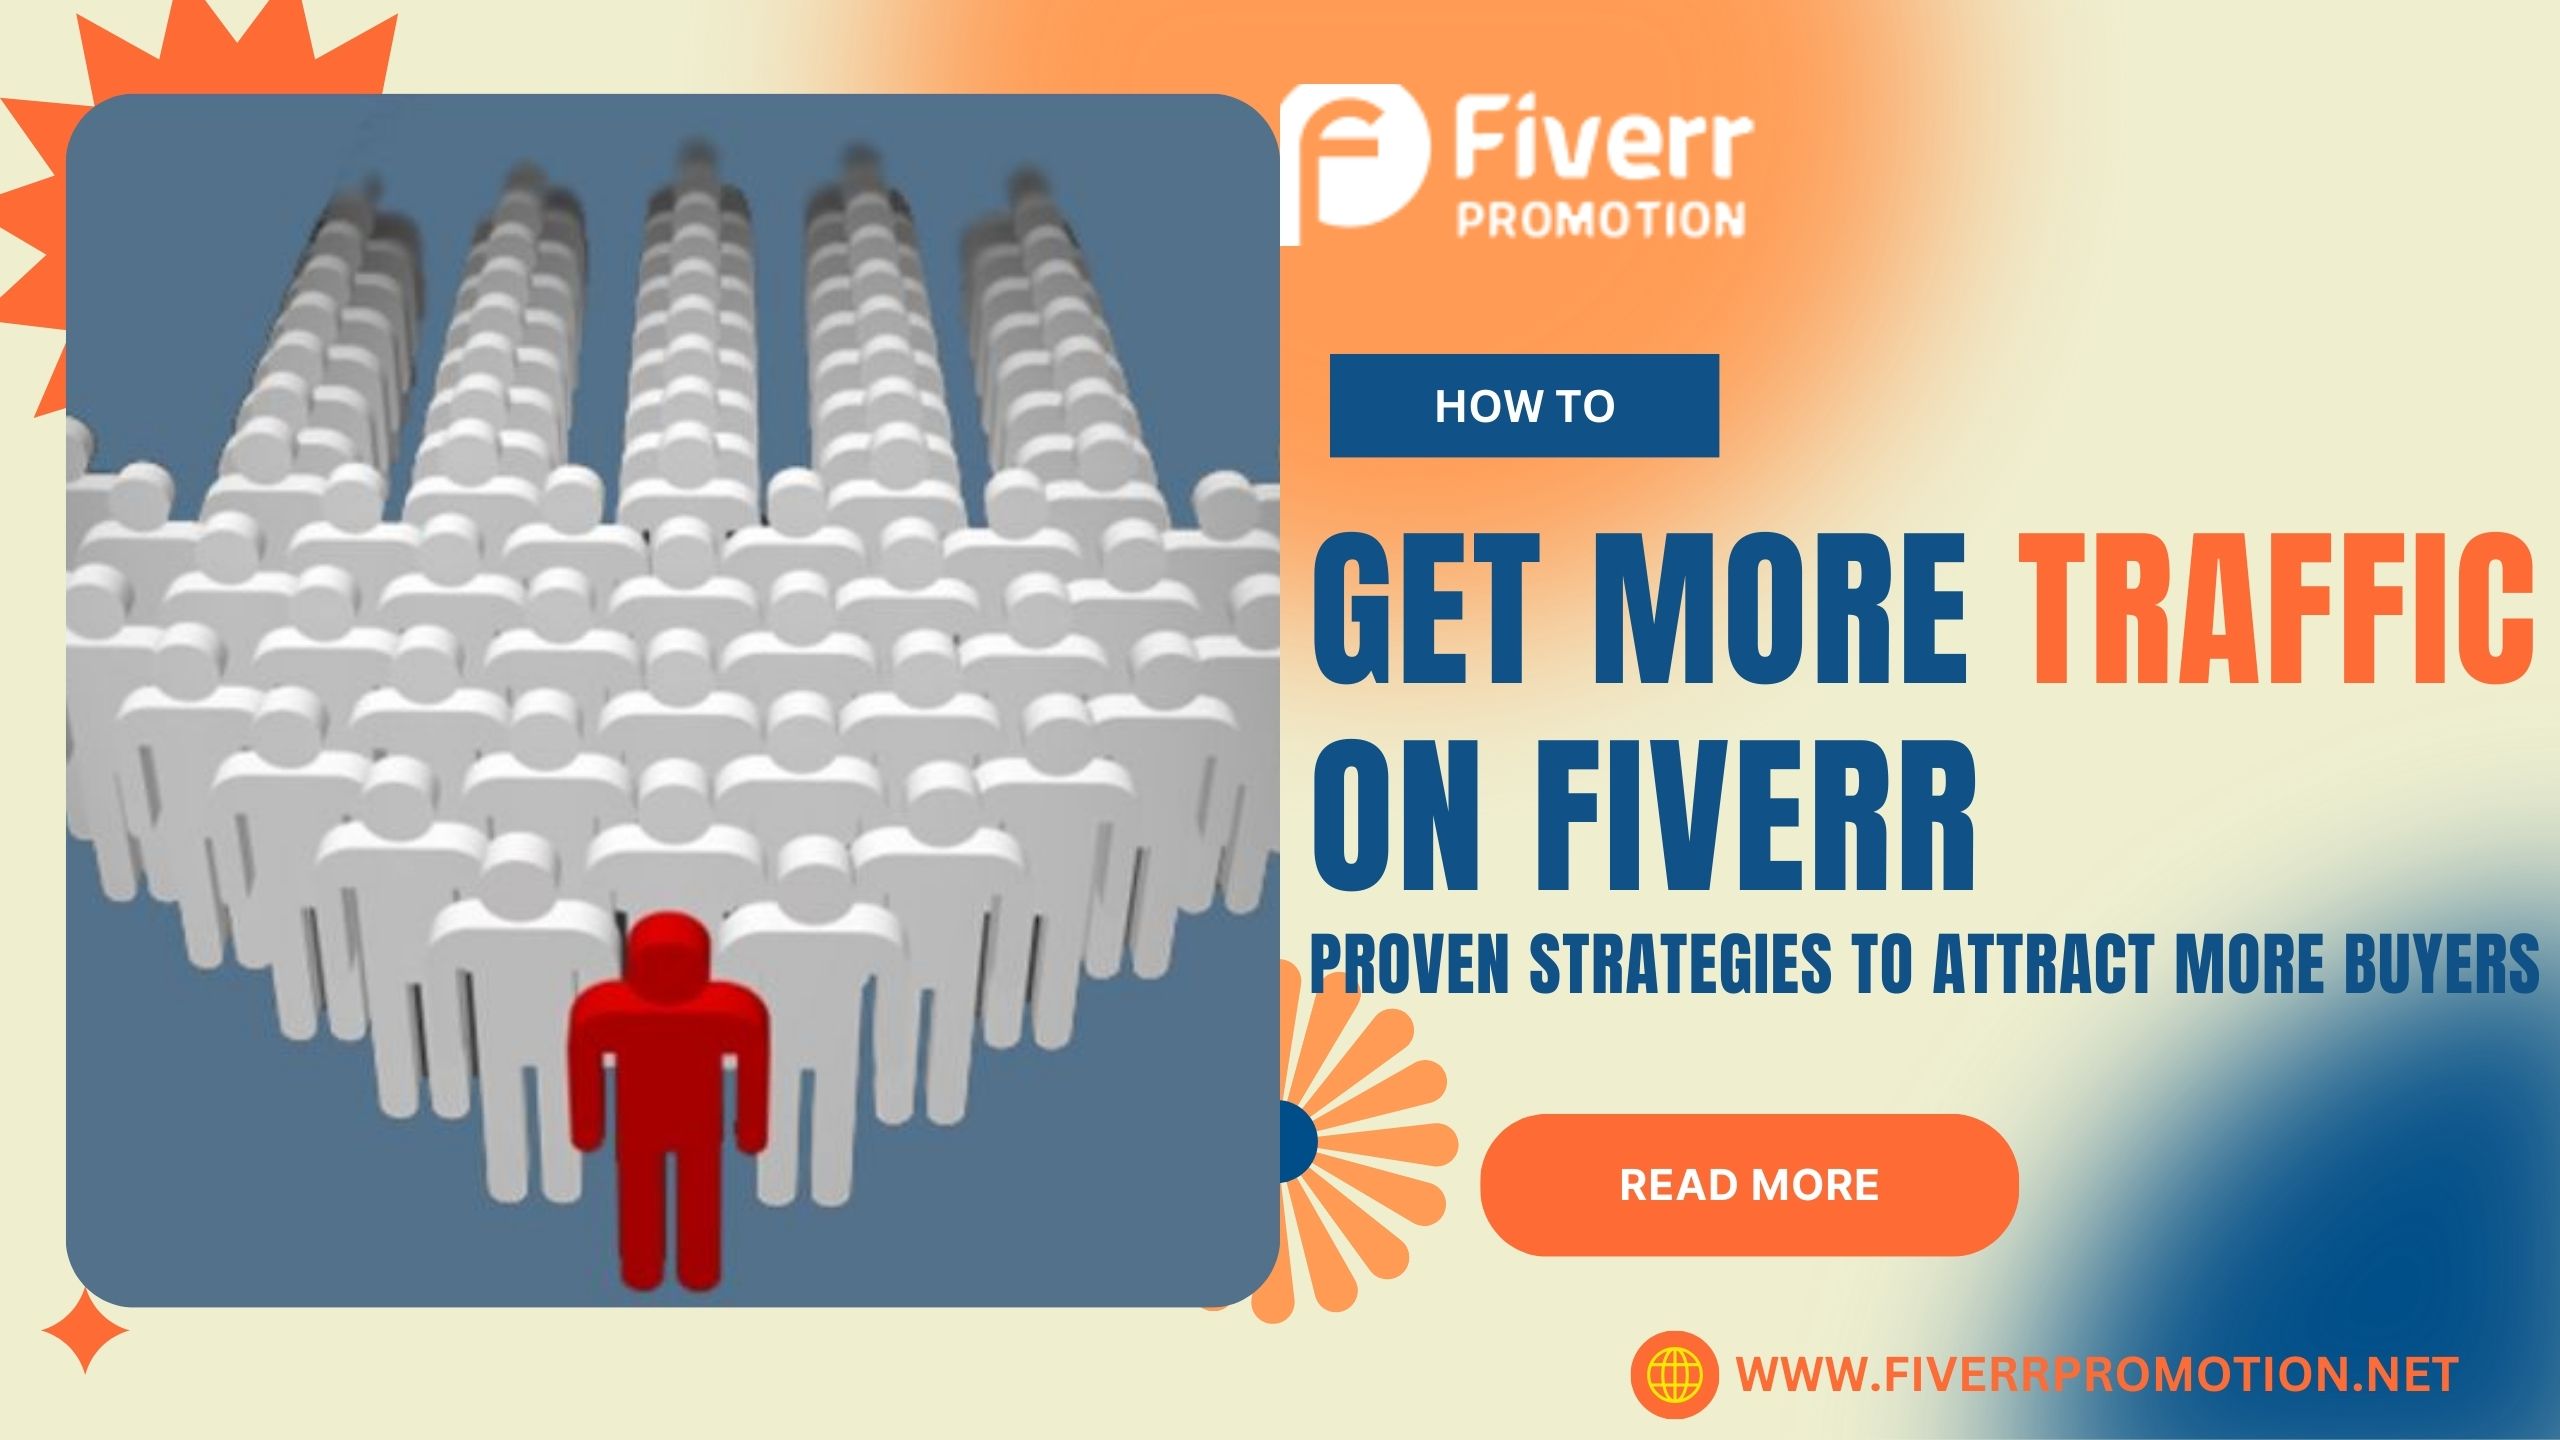 How To Get More Traffic On Fiverr Proven Strategies To Attract More Buyers Fiverr Promotion 